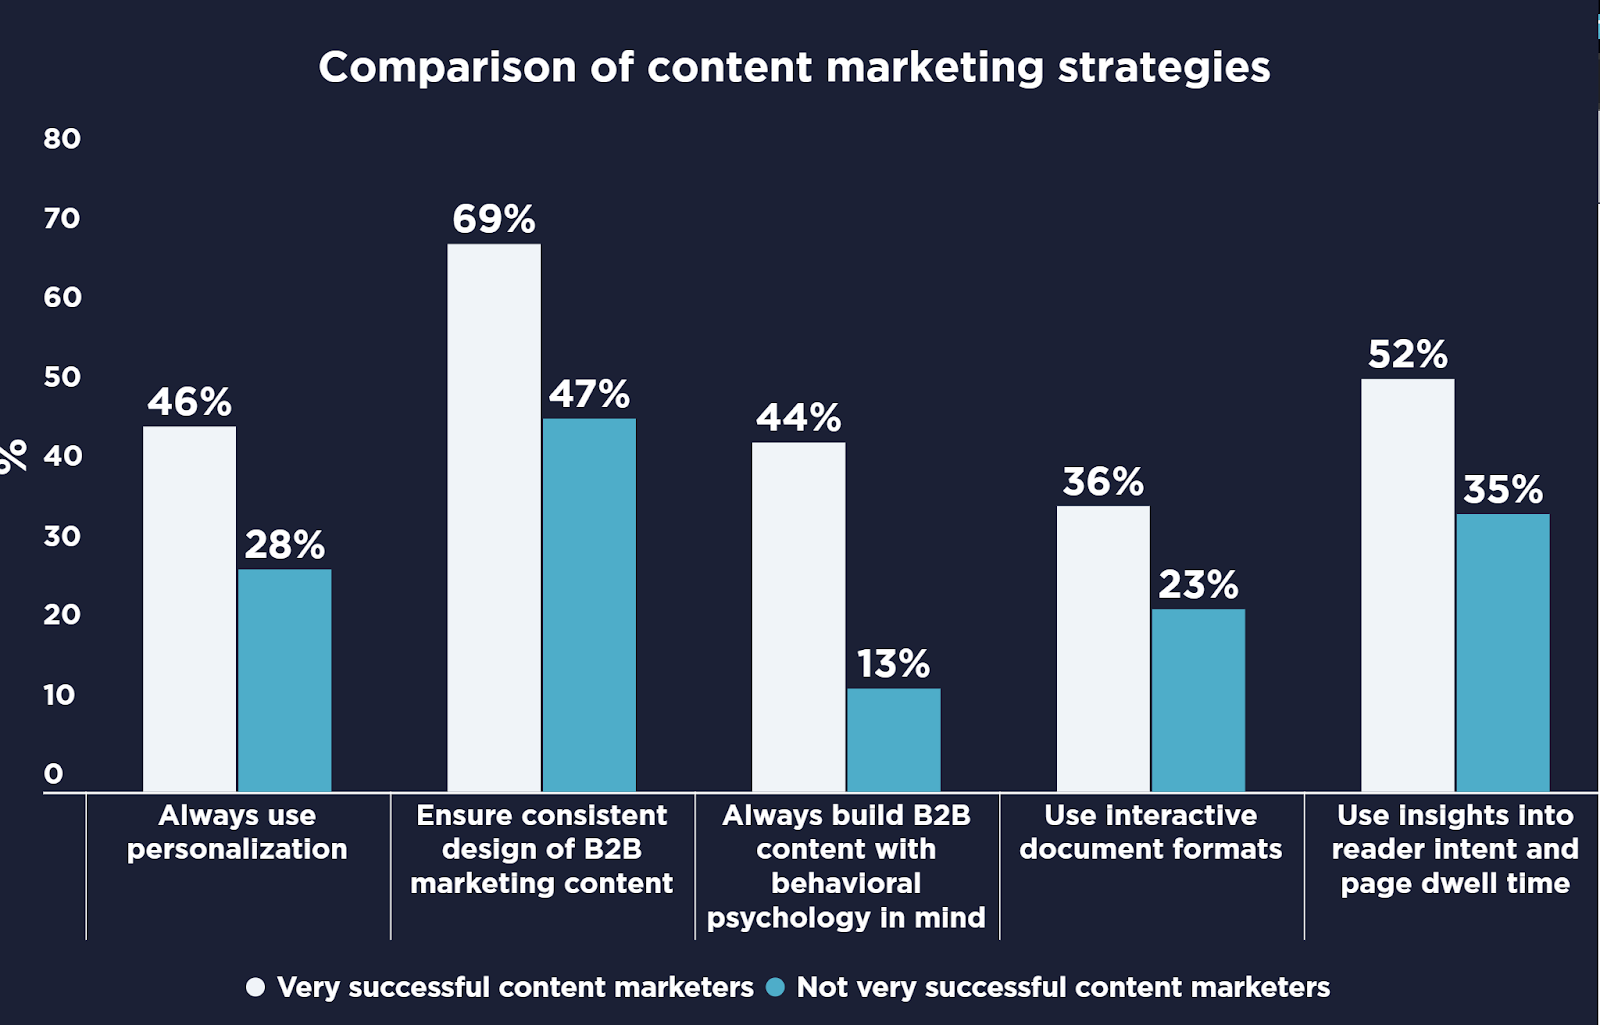 Graph showing a comparison of content marketing strategies